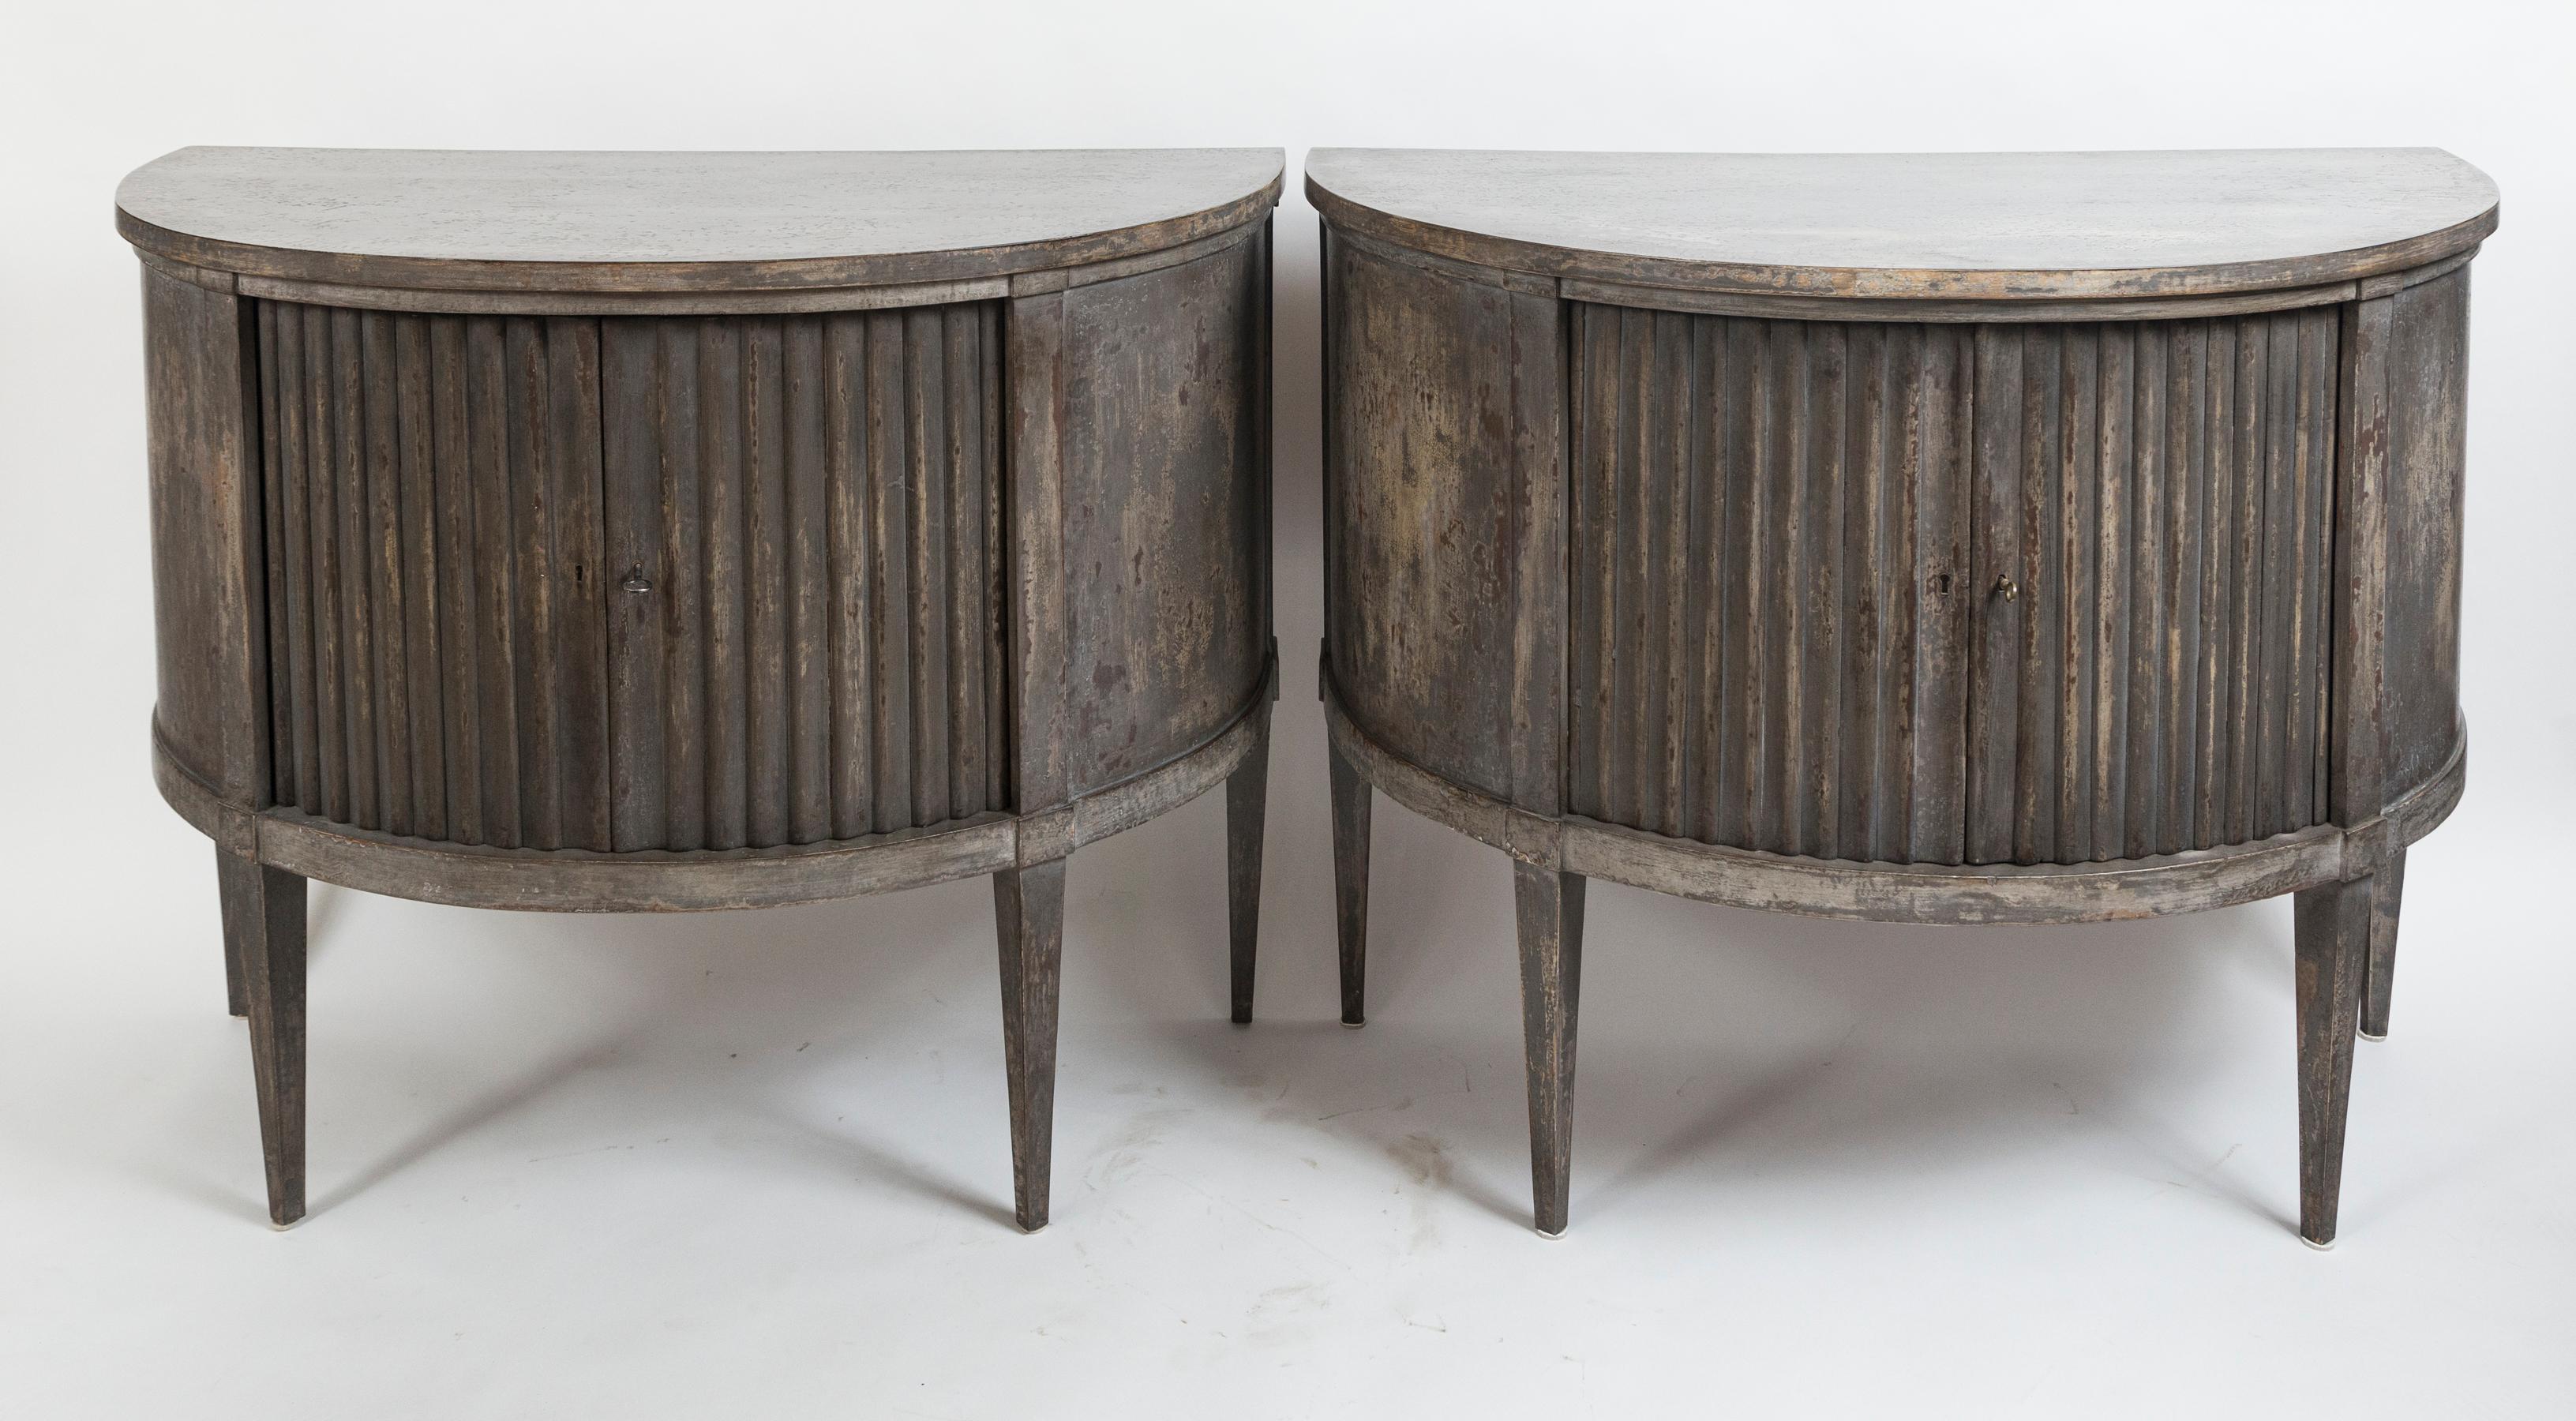 Pair of French painted demilune cabinets on high squared and tapered legs with louver doors
Note elegant proportions and finely patinated greige finish
Dating: 1880ca
Origin: France
Condition: Excellent restored condition and recently